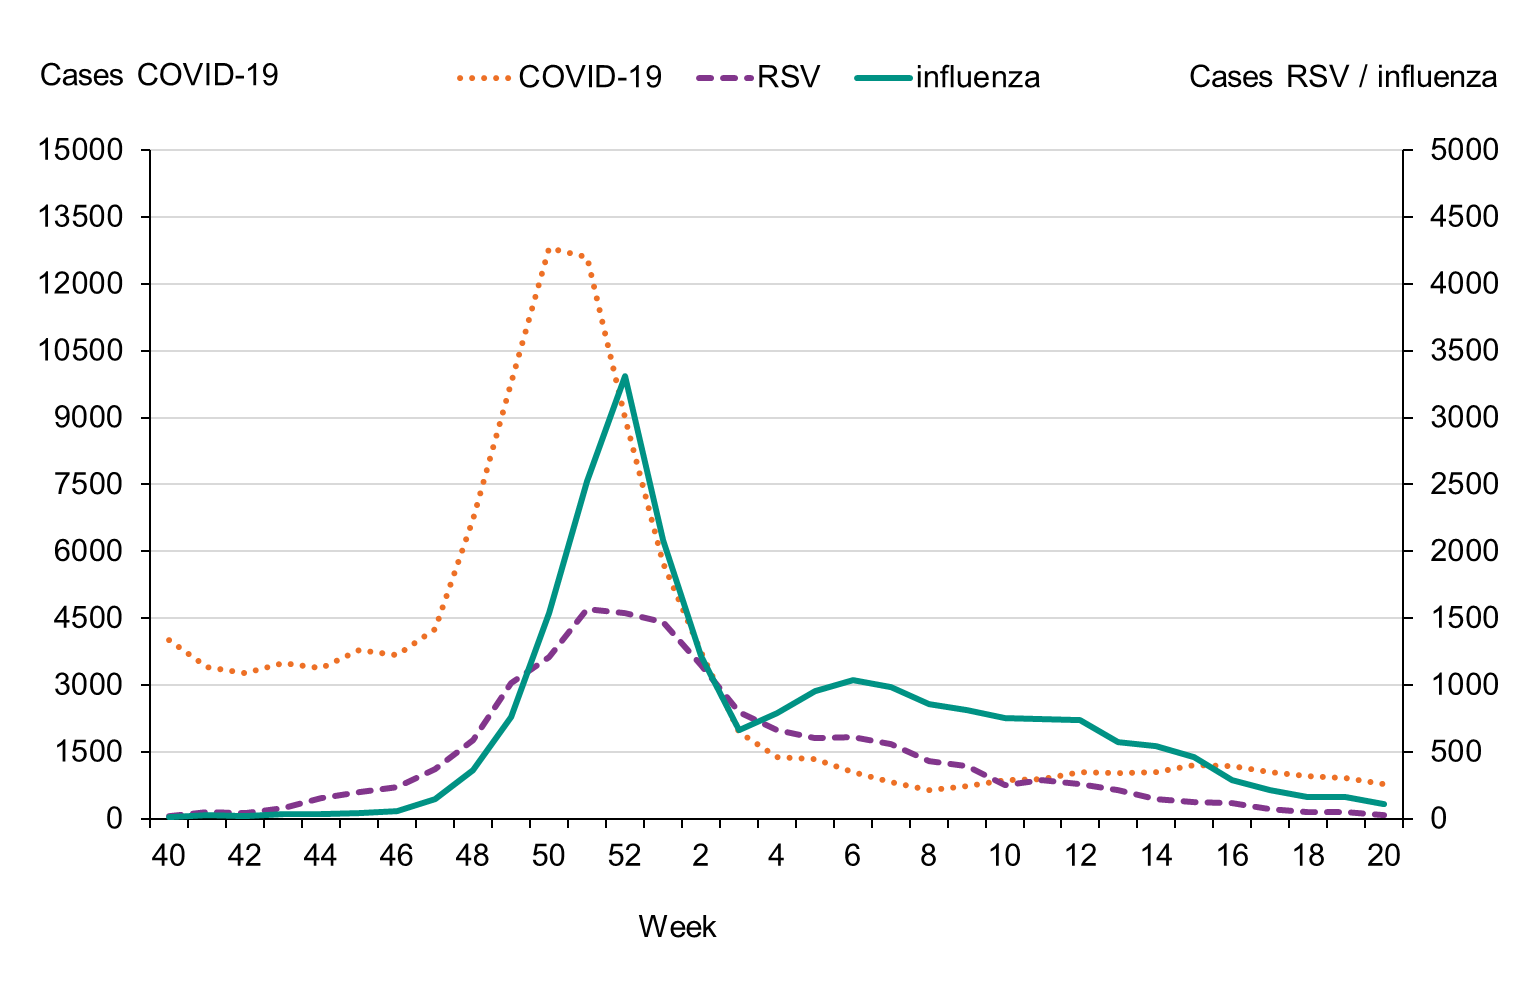 Cases of influenza, RSV and COVID-19 had overlapping peaks during weeks 50 to 52, 2022.